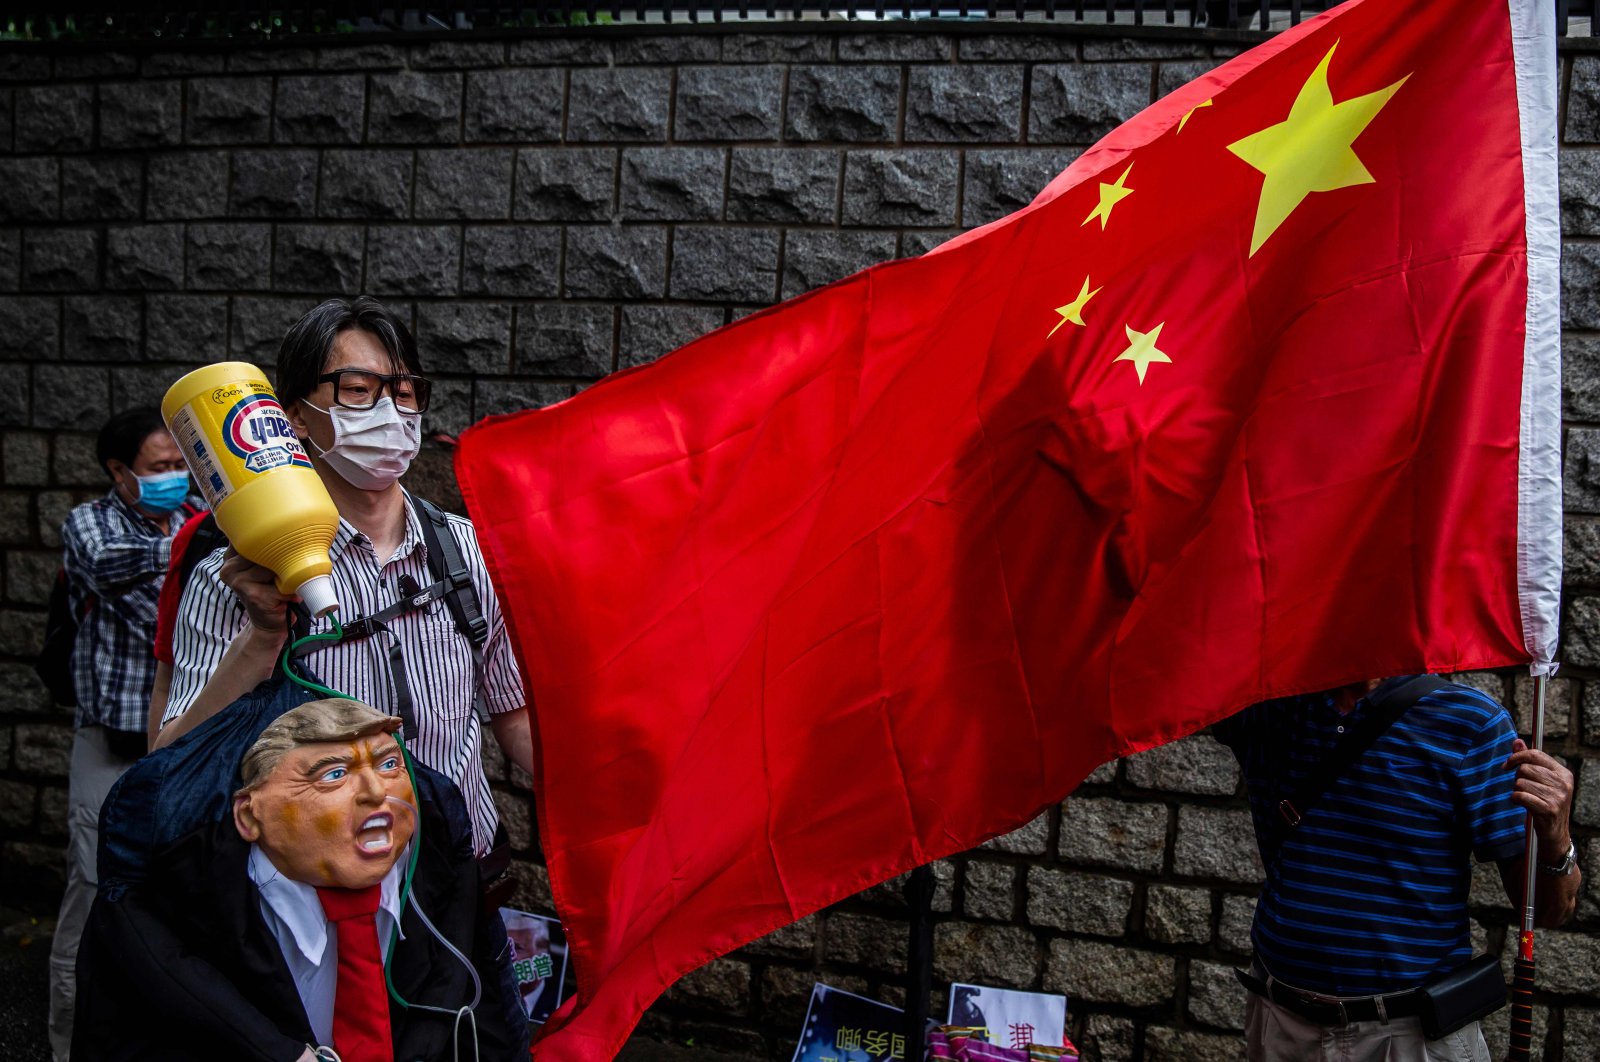 A pro-China activist holds an effigy of U.S. President Donald Trump during a protest outside the U.S. consulate in Hong Kong, May 30, 2020. (AFP Photo)